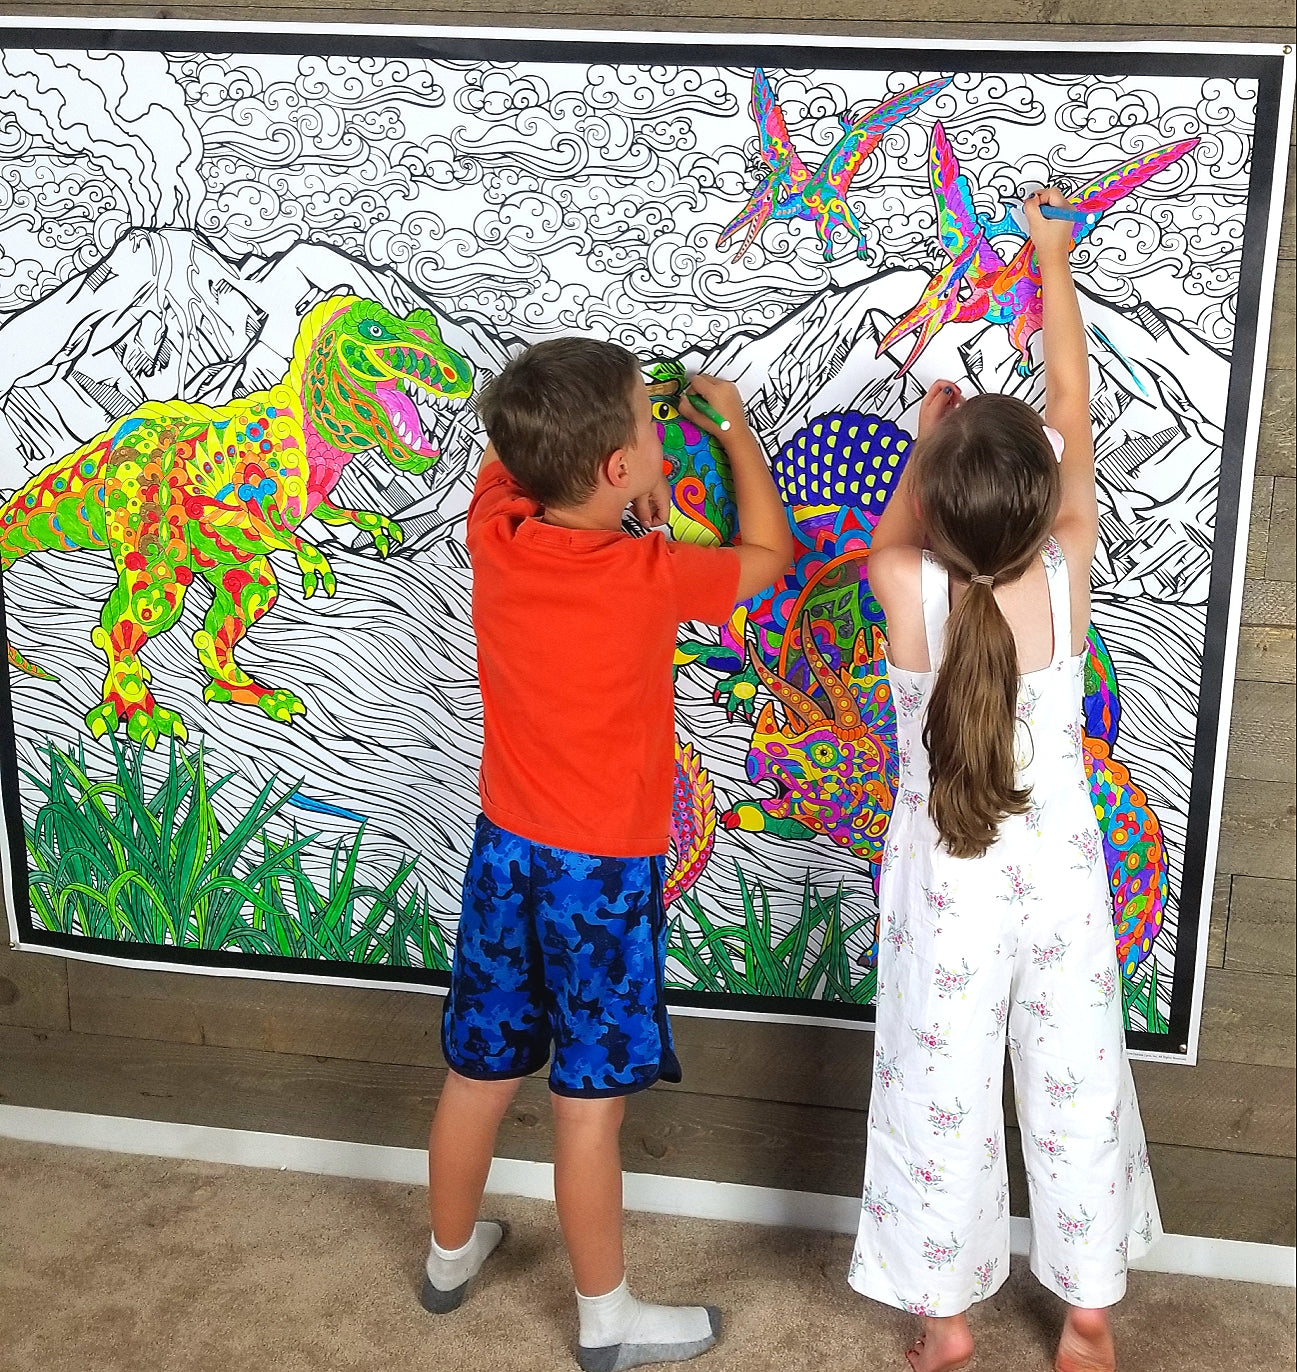 Dinosaur Personalized Giant Coloring Poster  46"x60"